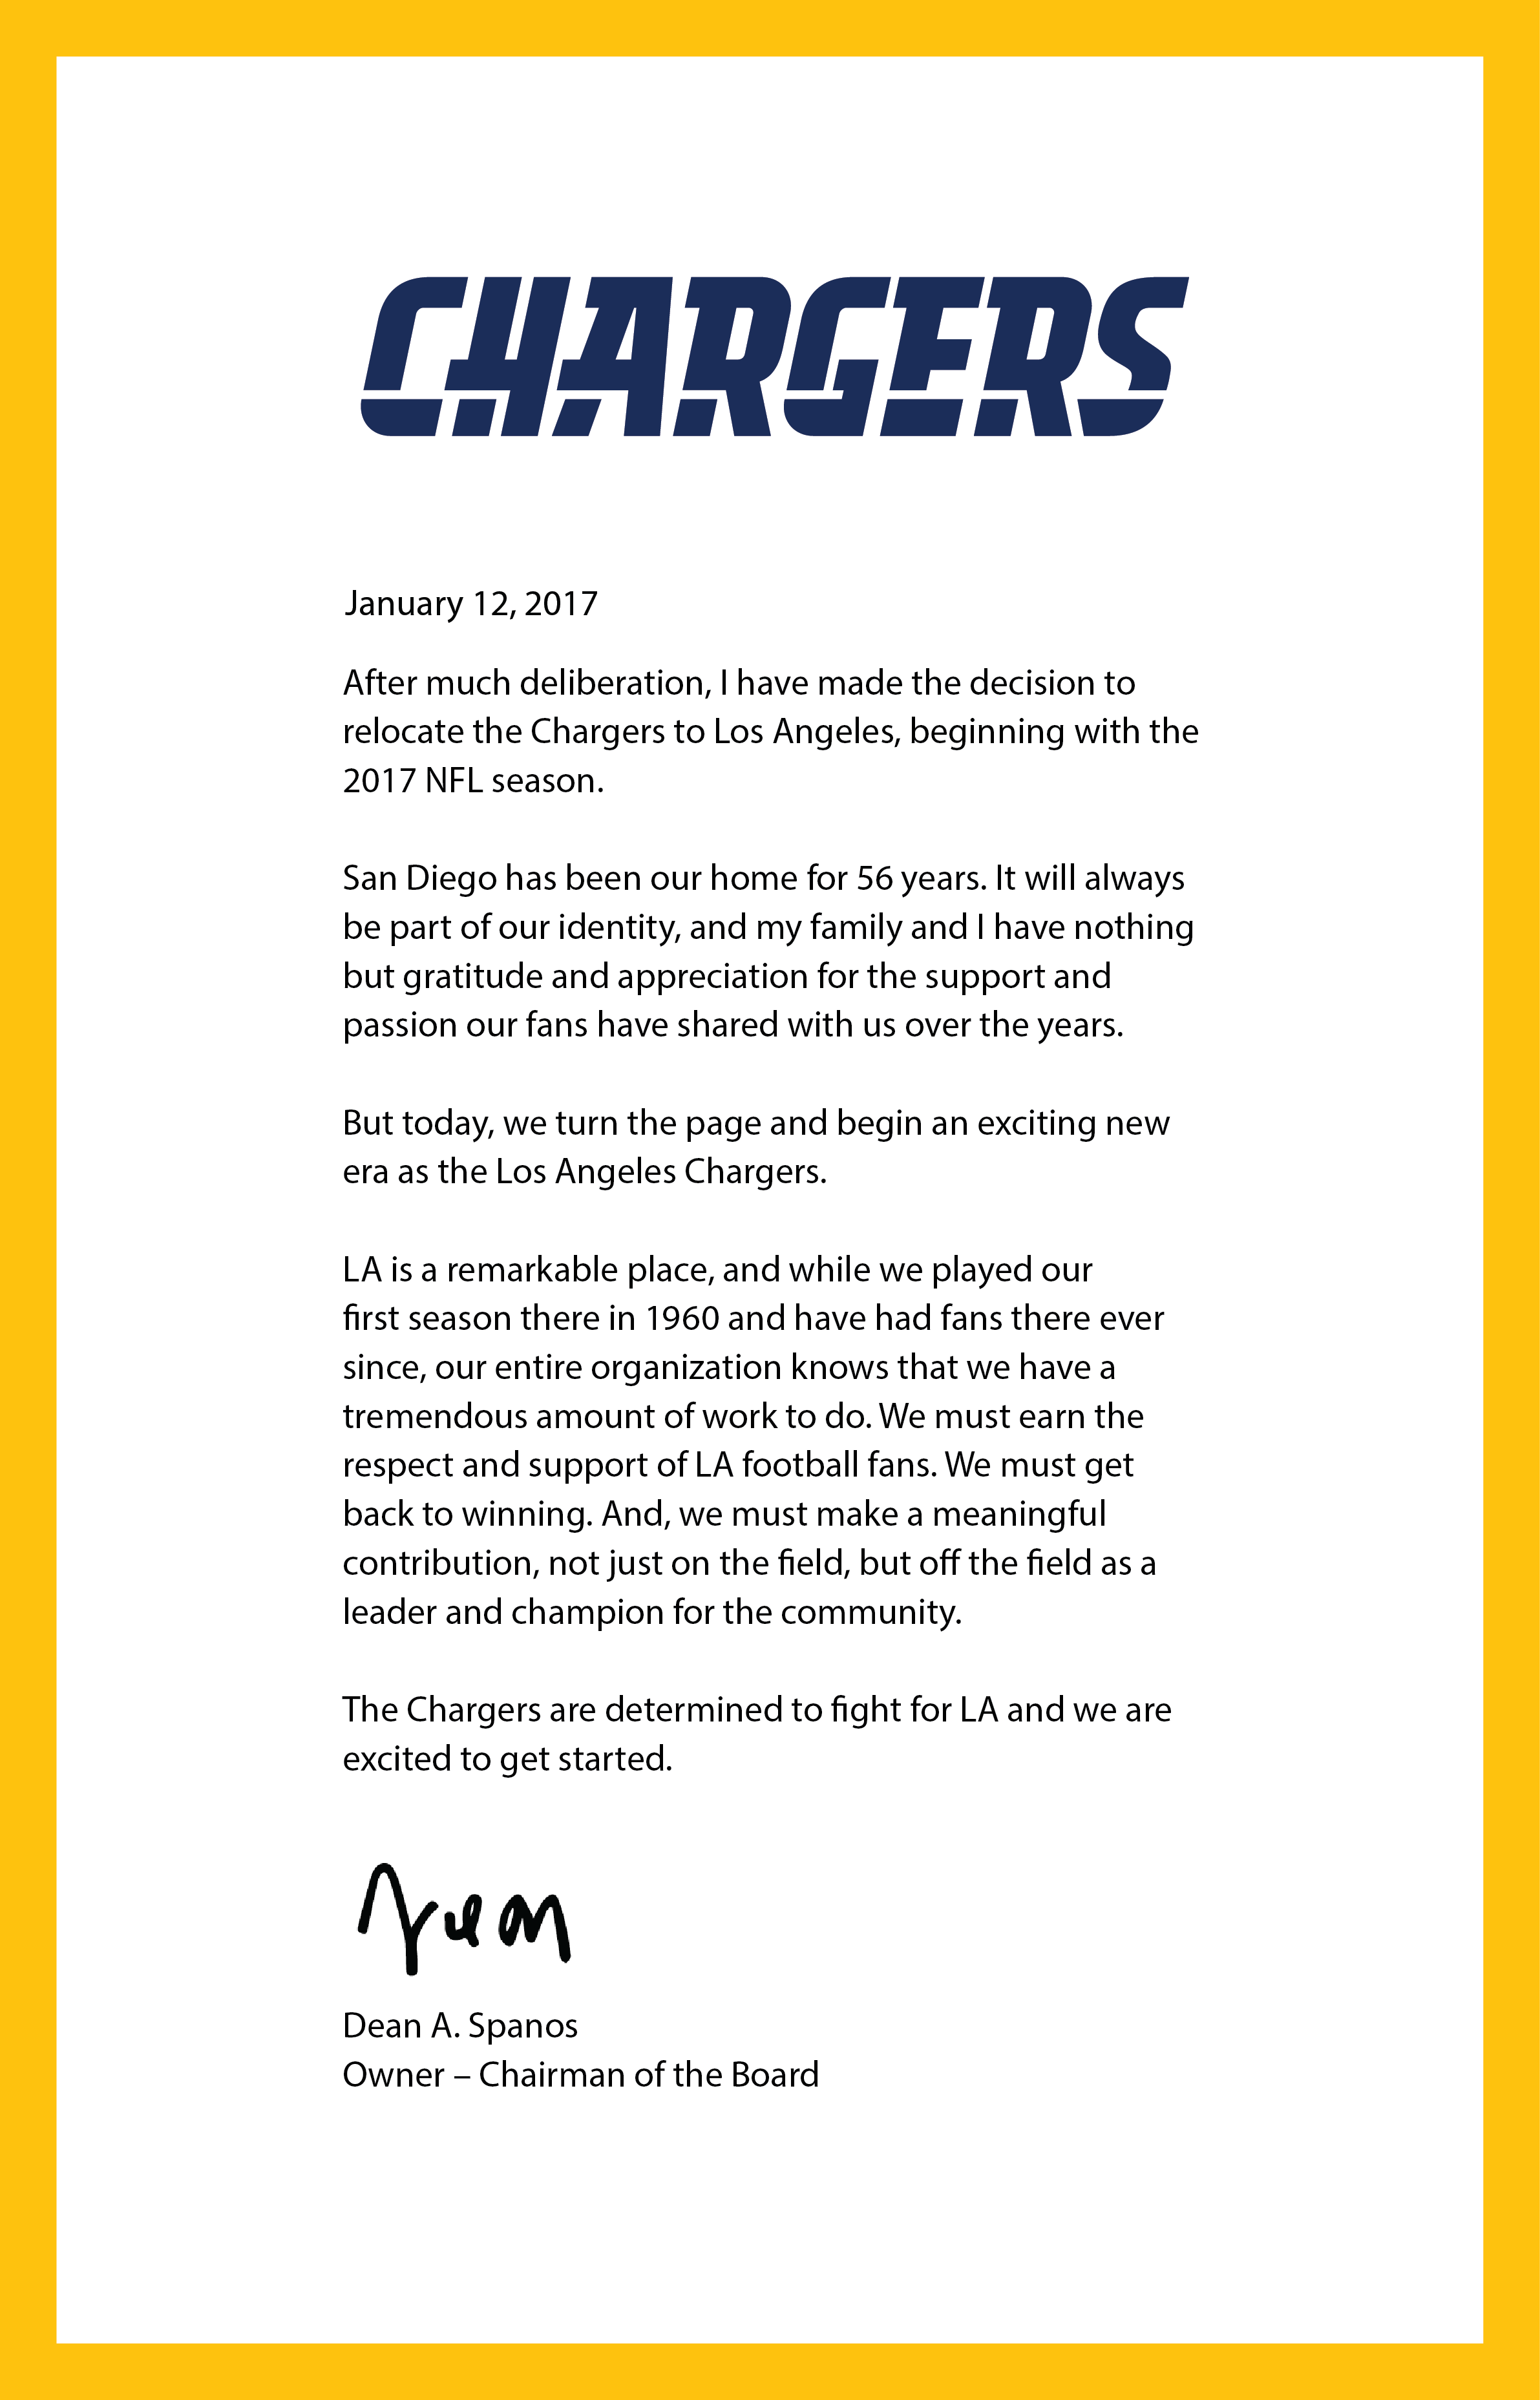 Los Angeles Chargers on X: 'A letter from Dean Spanos